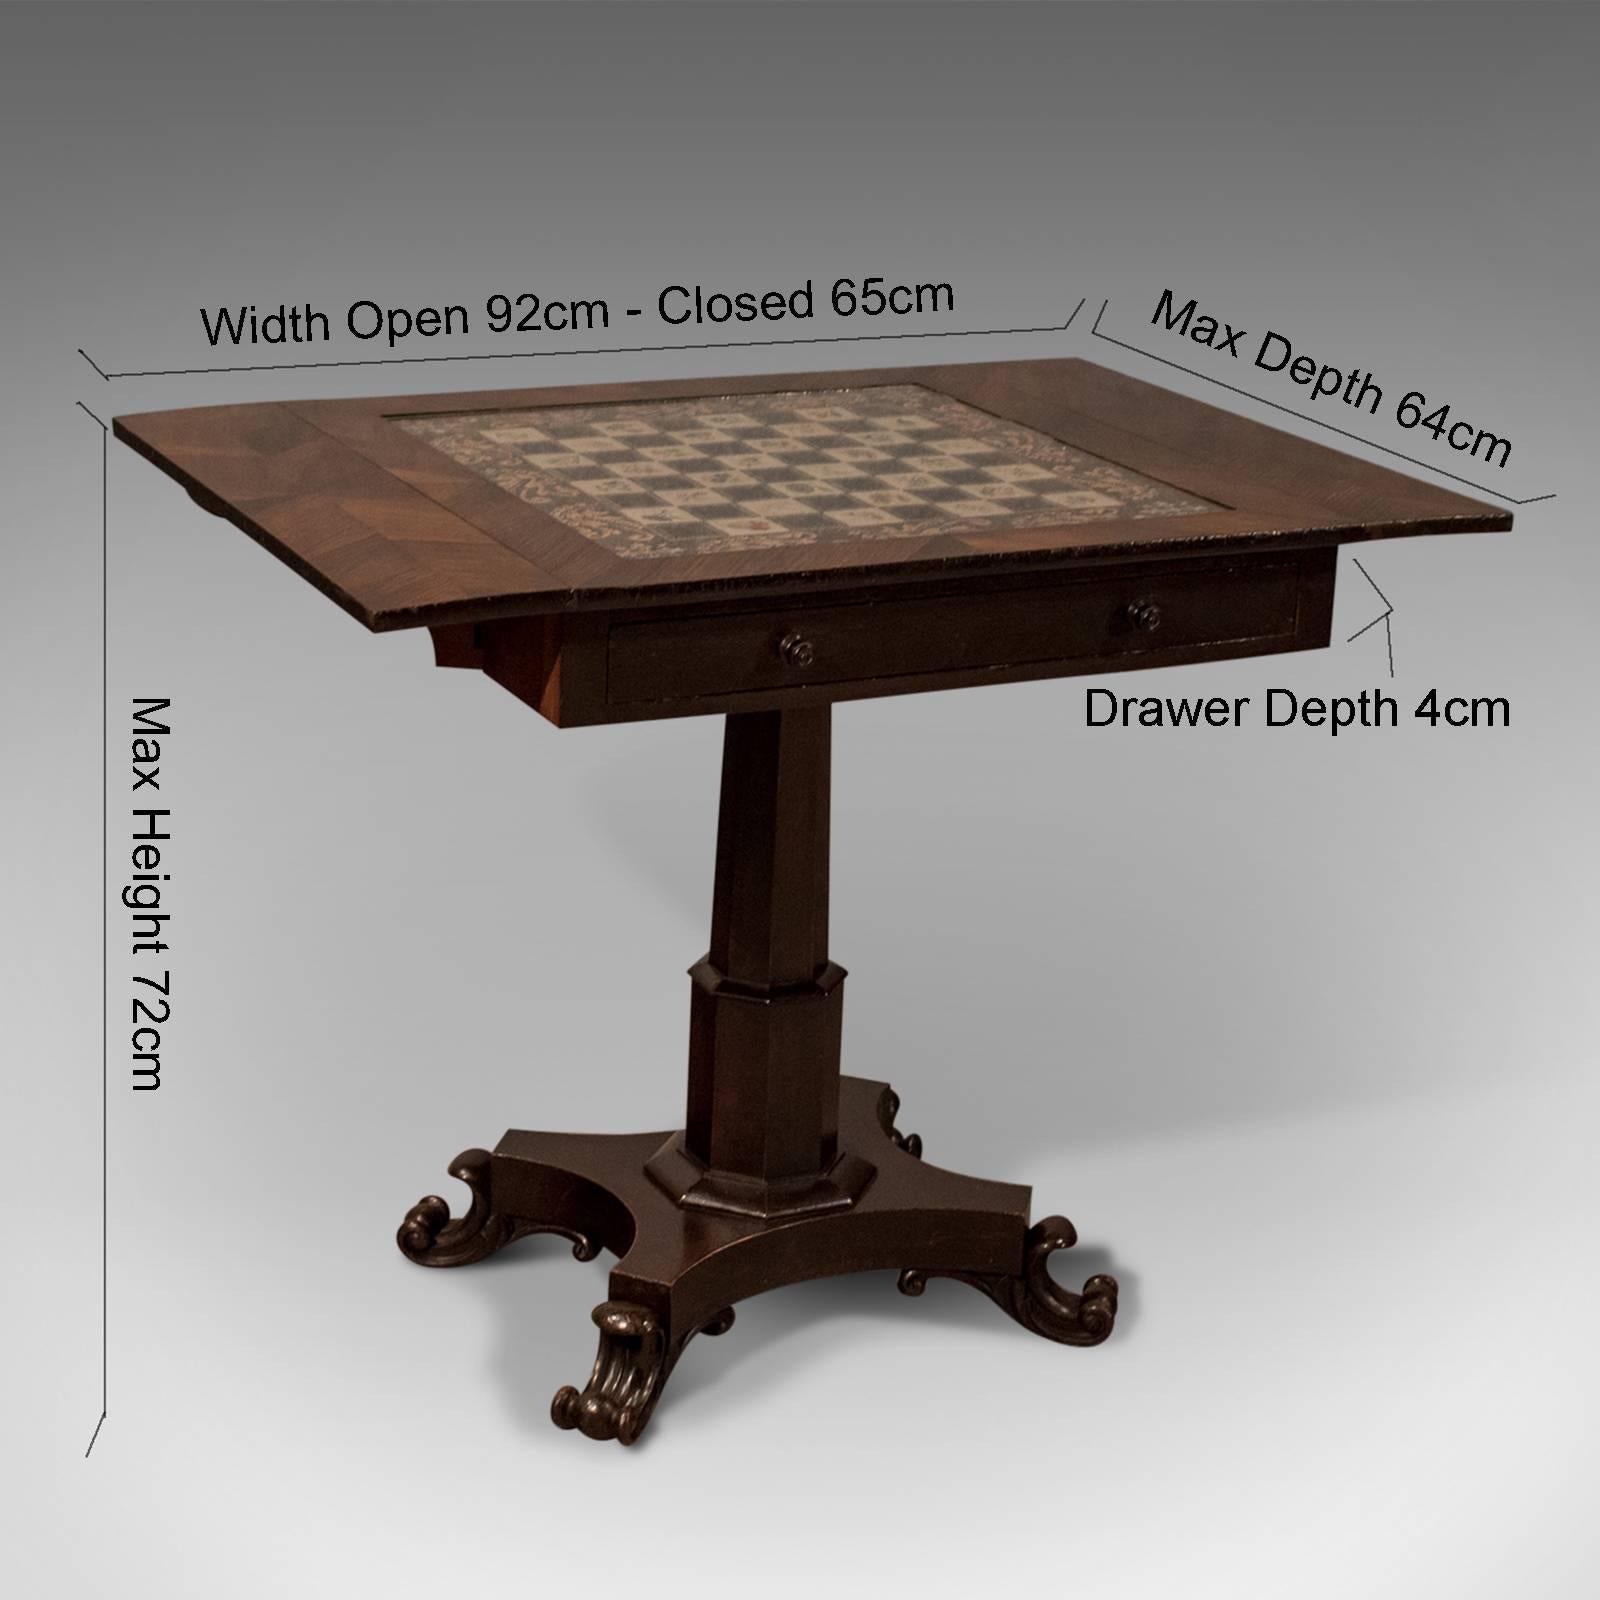 Antique kingwood chess table, English Regency, circa 1820

A rare and interesting chess games table presented in very good antique condition
Displaying fine kingwood veneer over mahogany
With needlepoint tapestry playing surface below